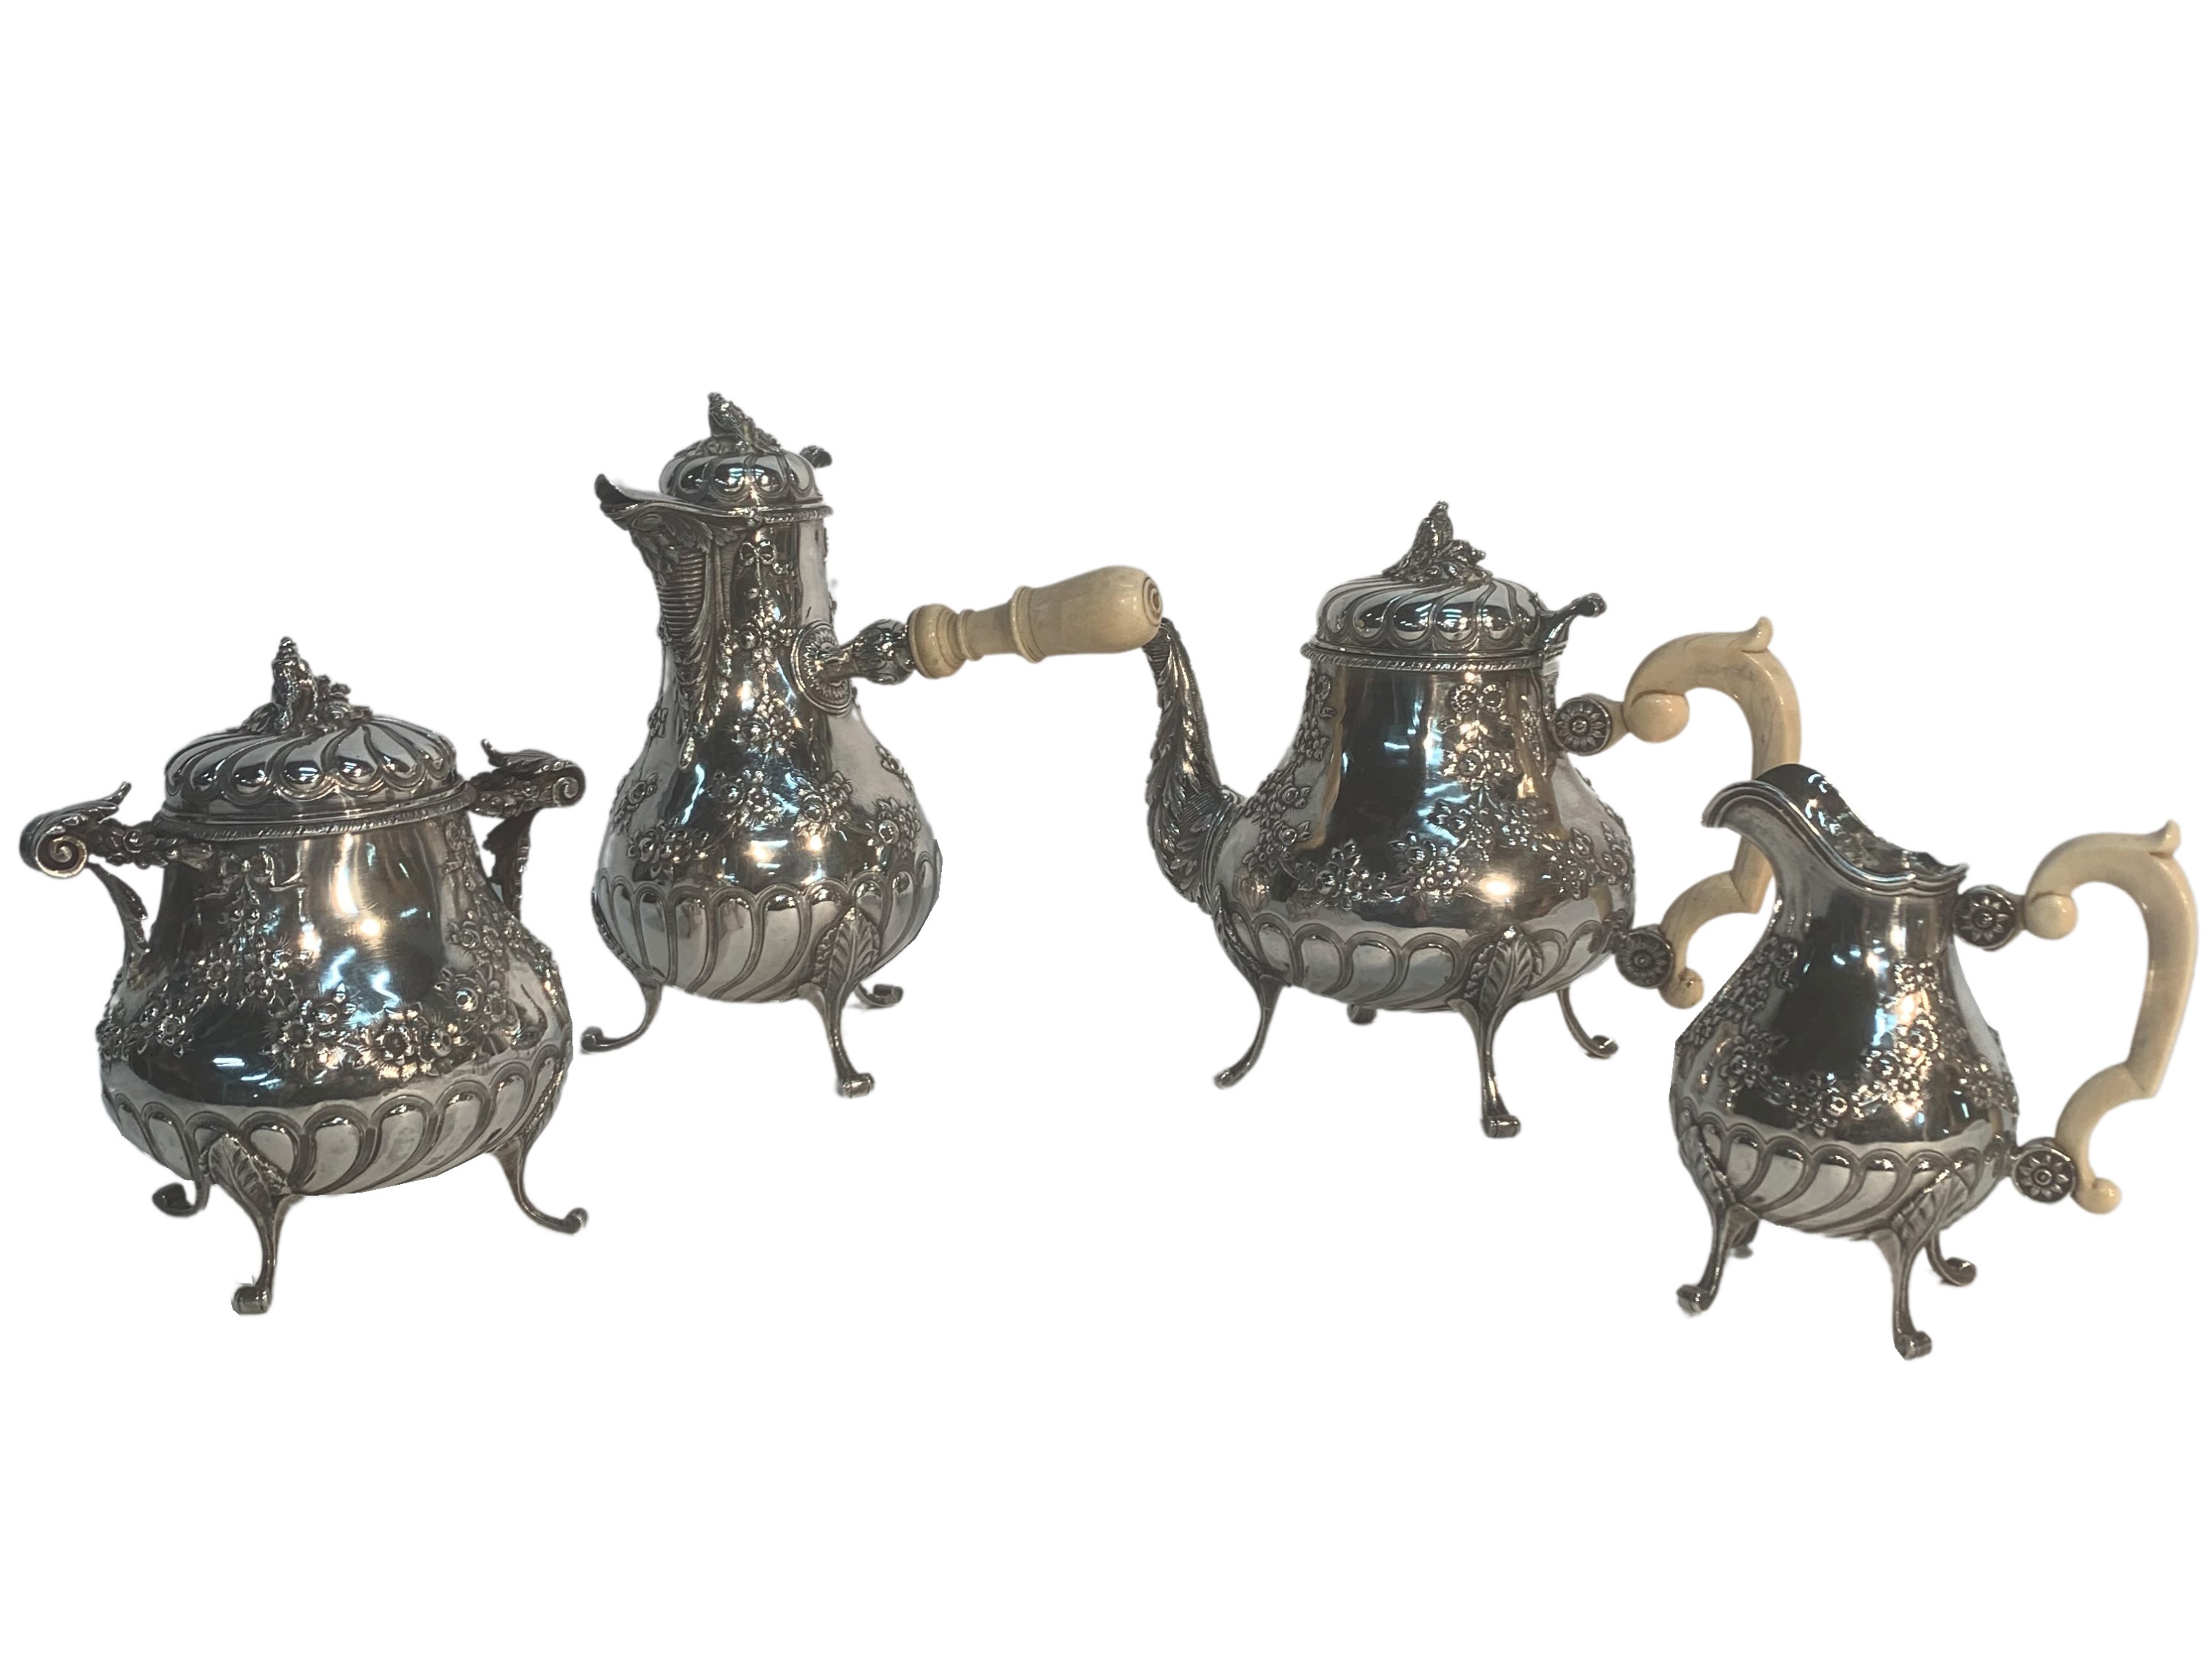 4 MATCHING FRENCH SILVER SERVING